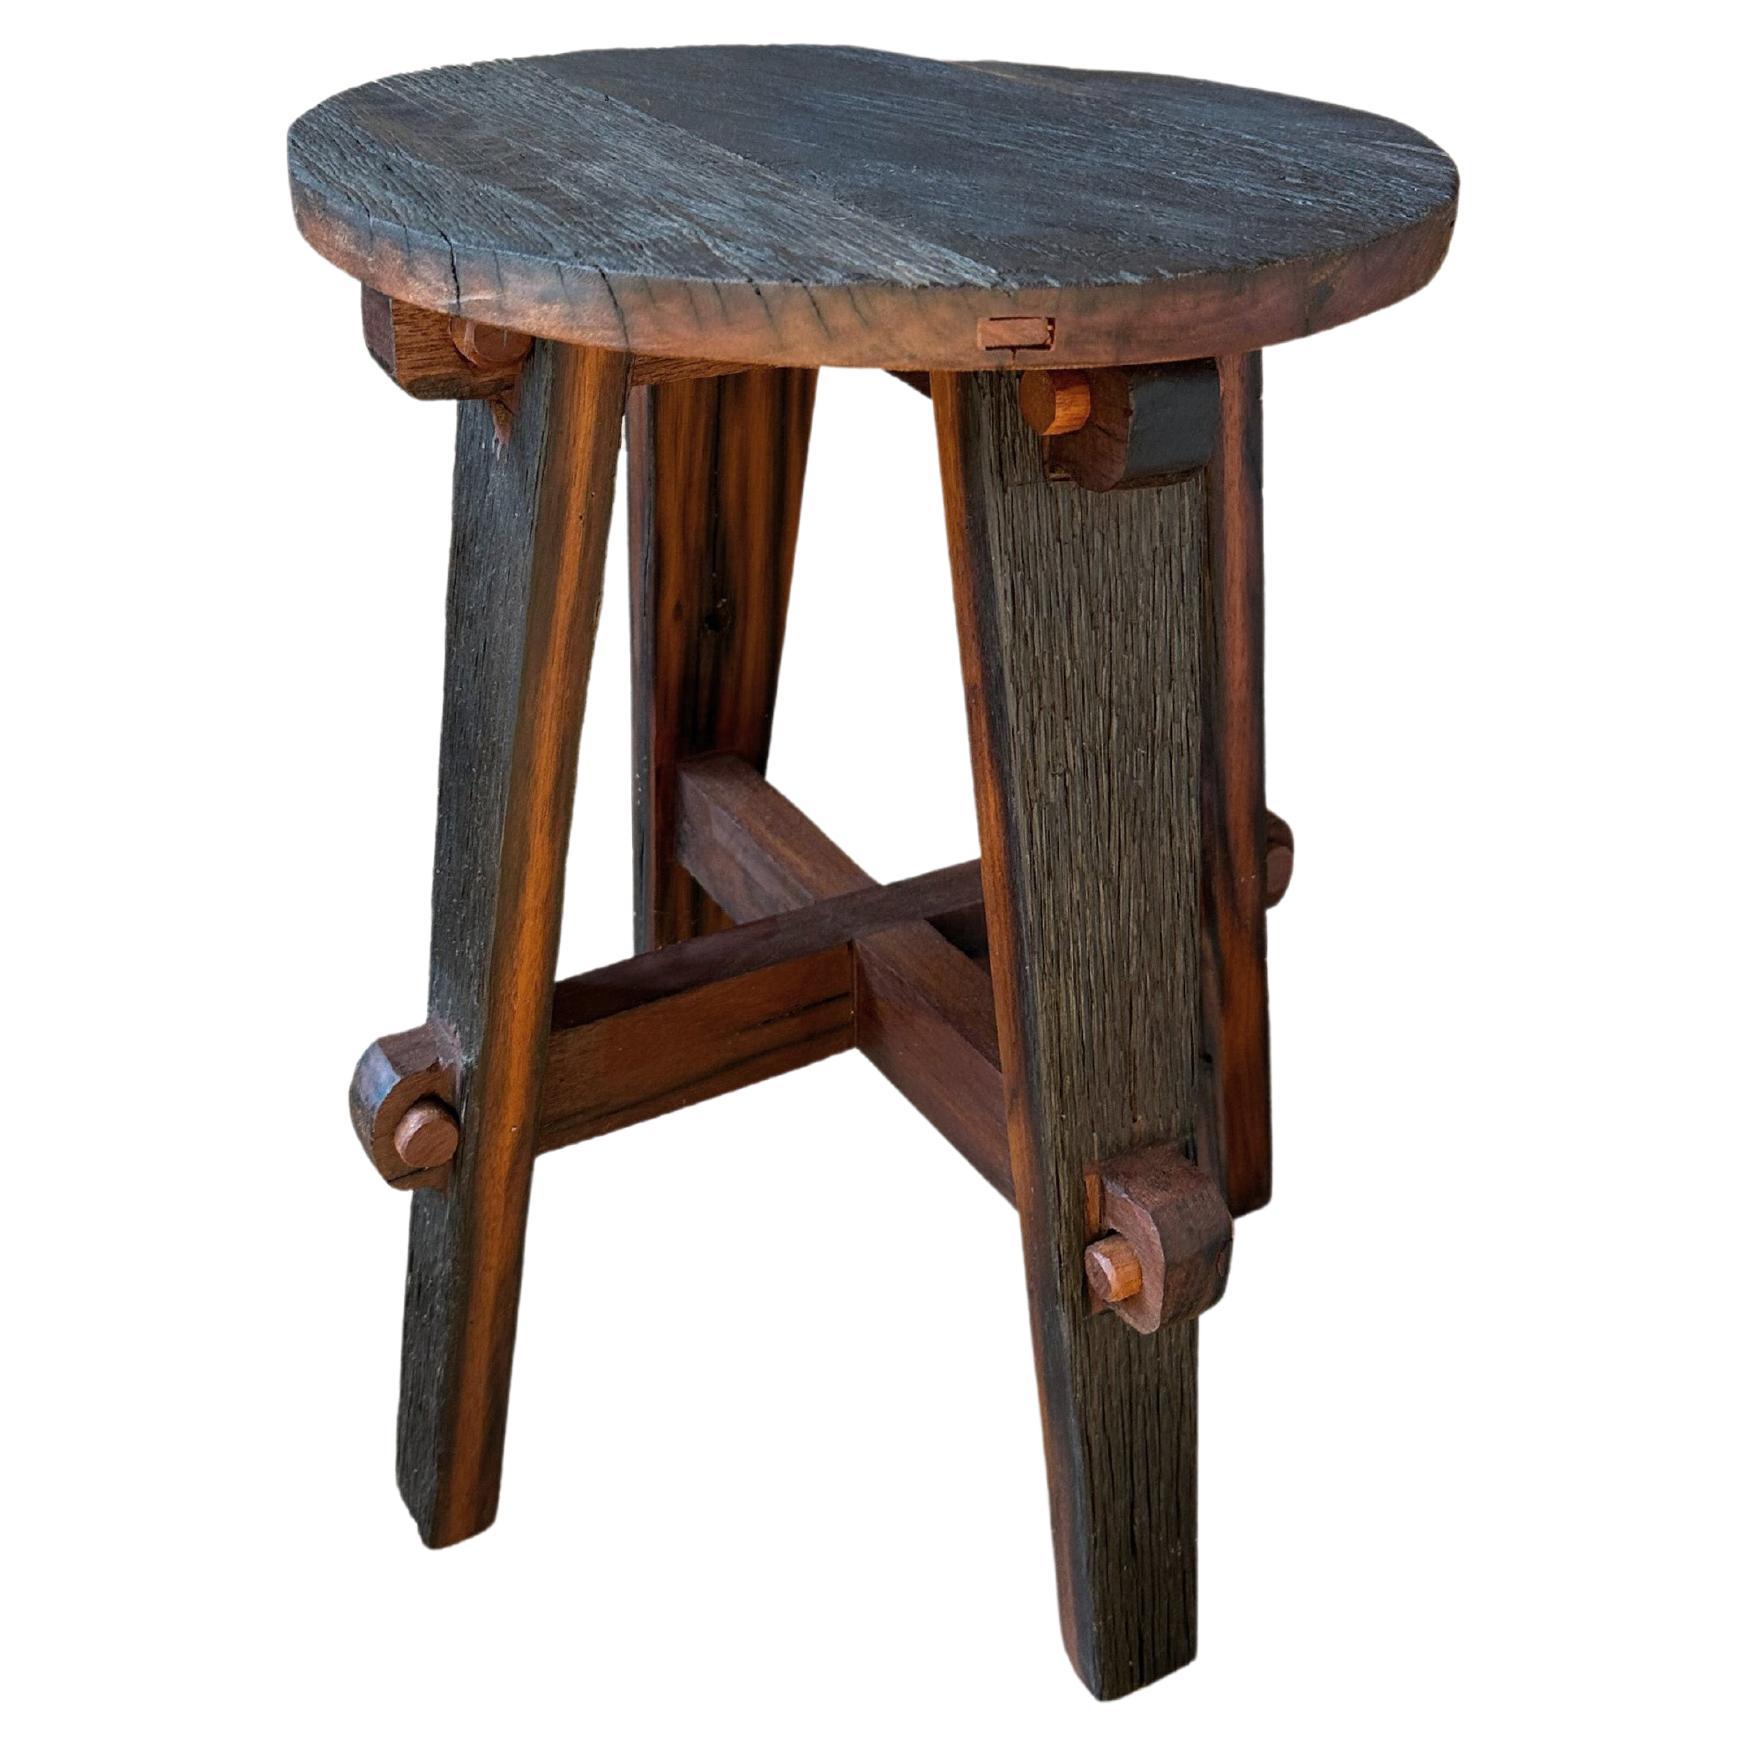 Ironwood Stool Modern Organic, Hand Crafted with Artisanal Wood Joinery For Sale